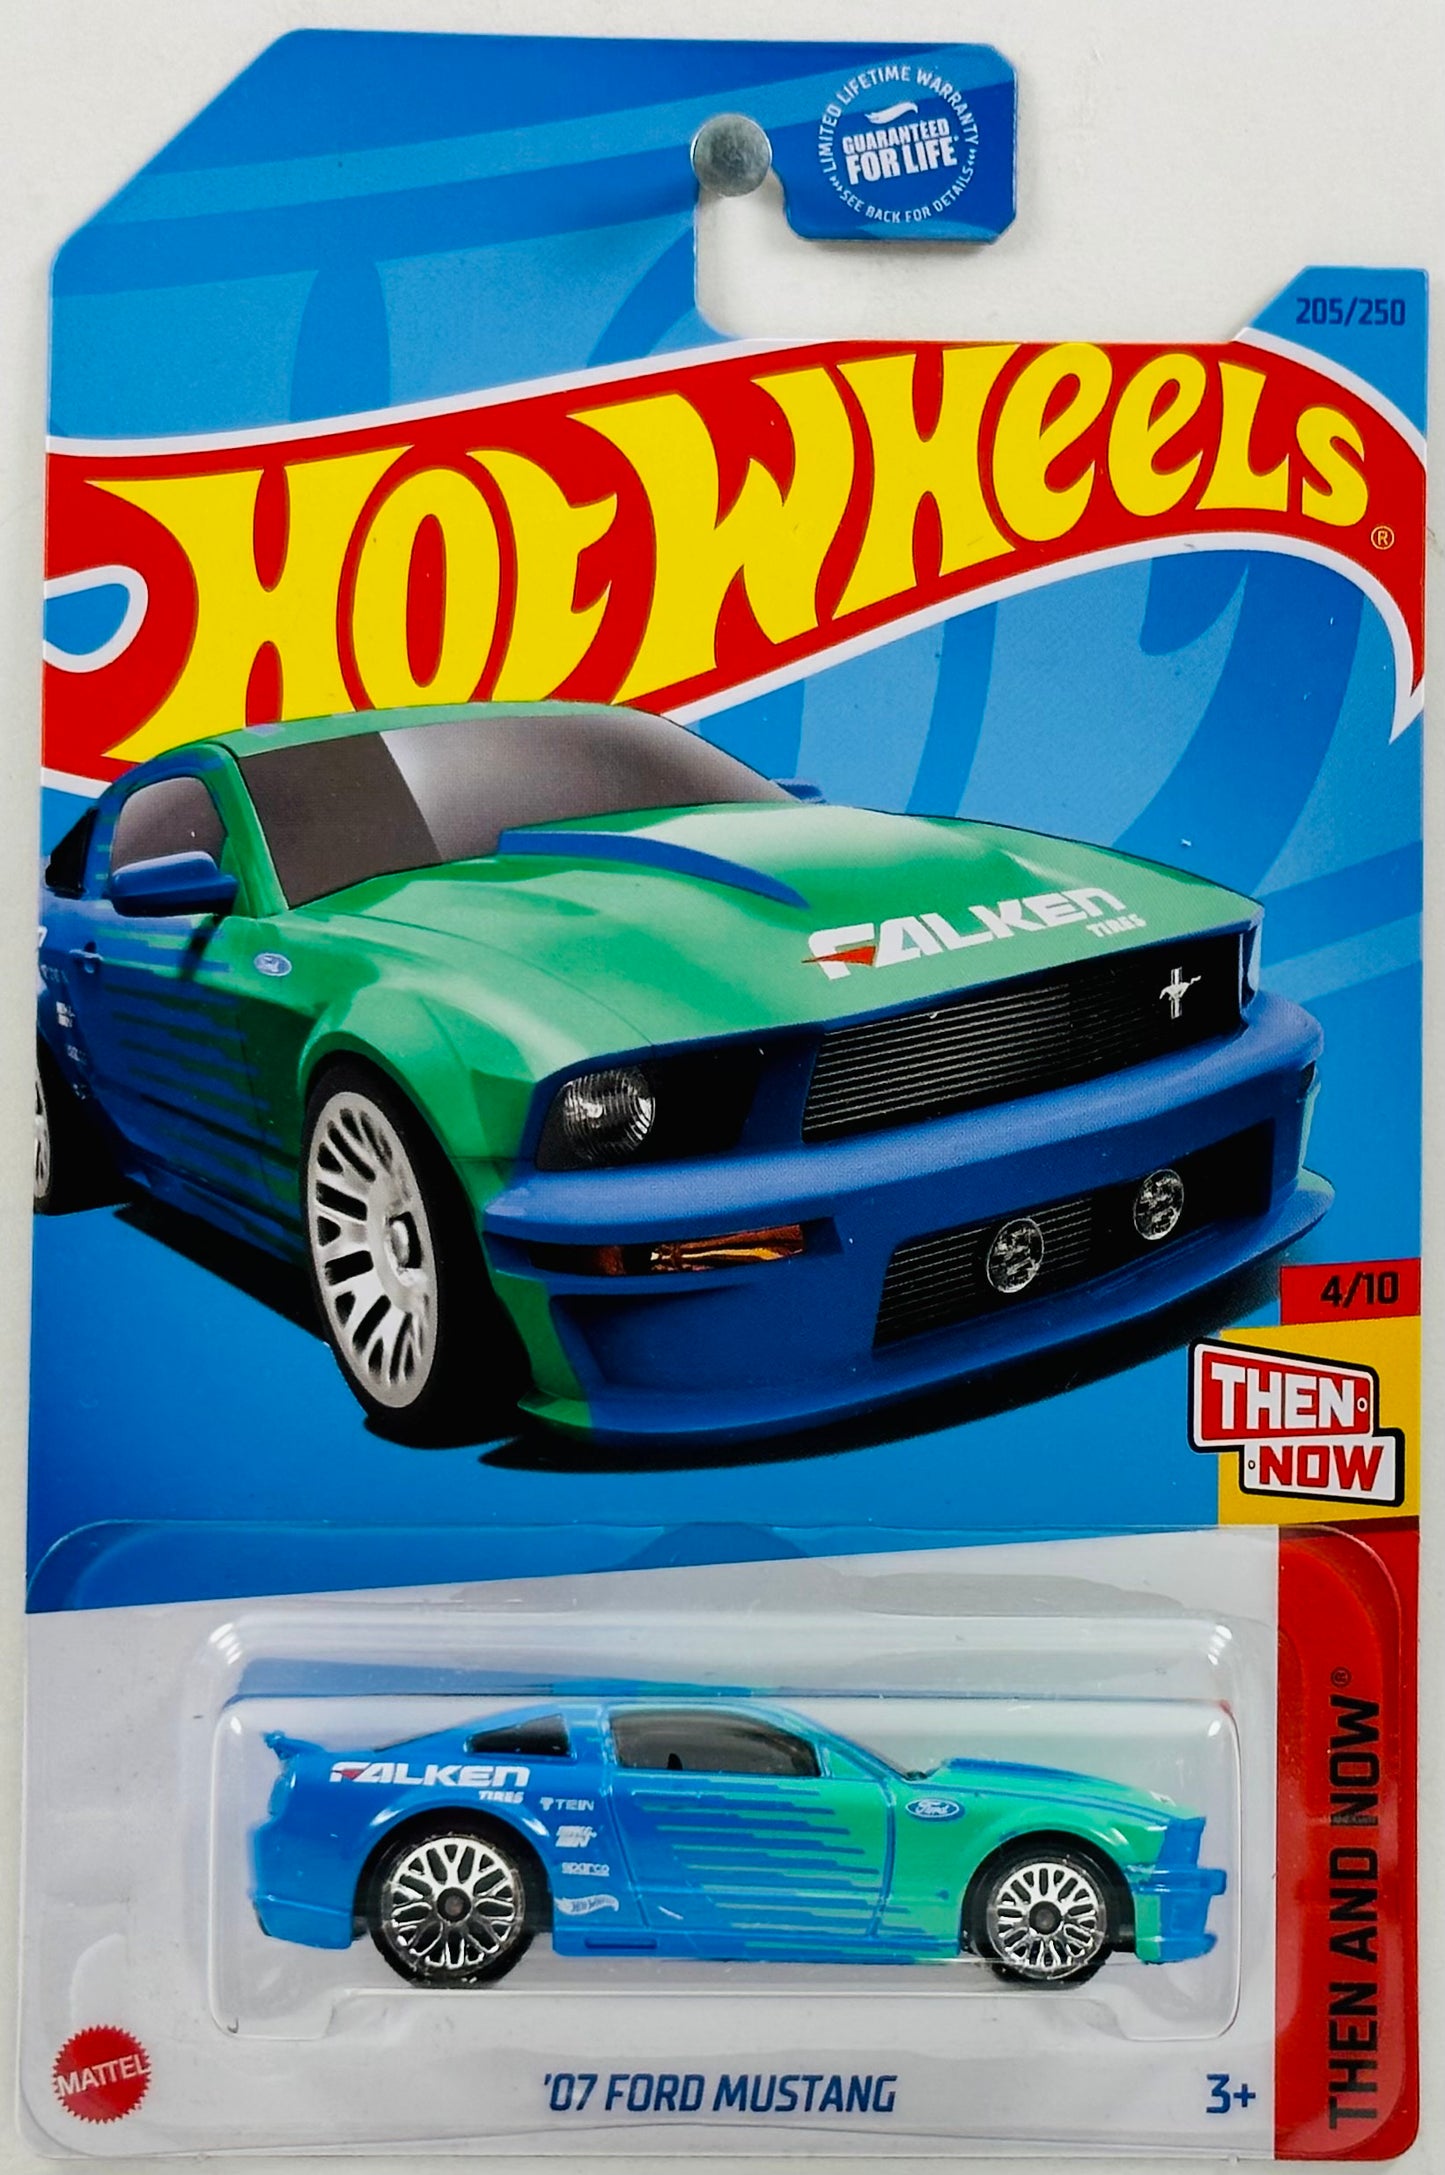 Hot Wheels 2023 - Collector # 205/250 - Then And Now 04/10 - '07 Ford Mustang - Falken Racing Blue - USA